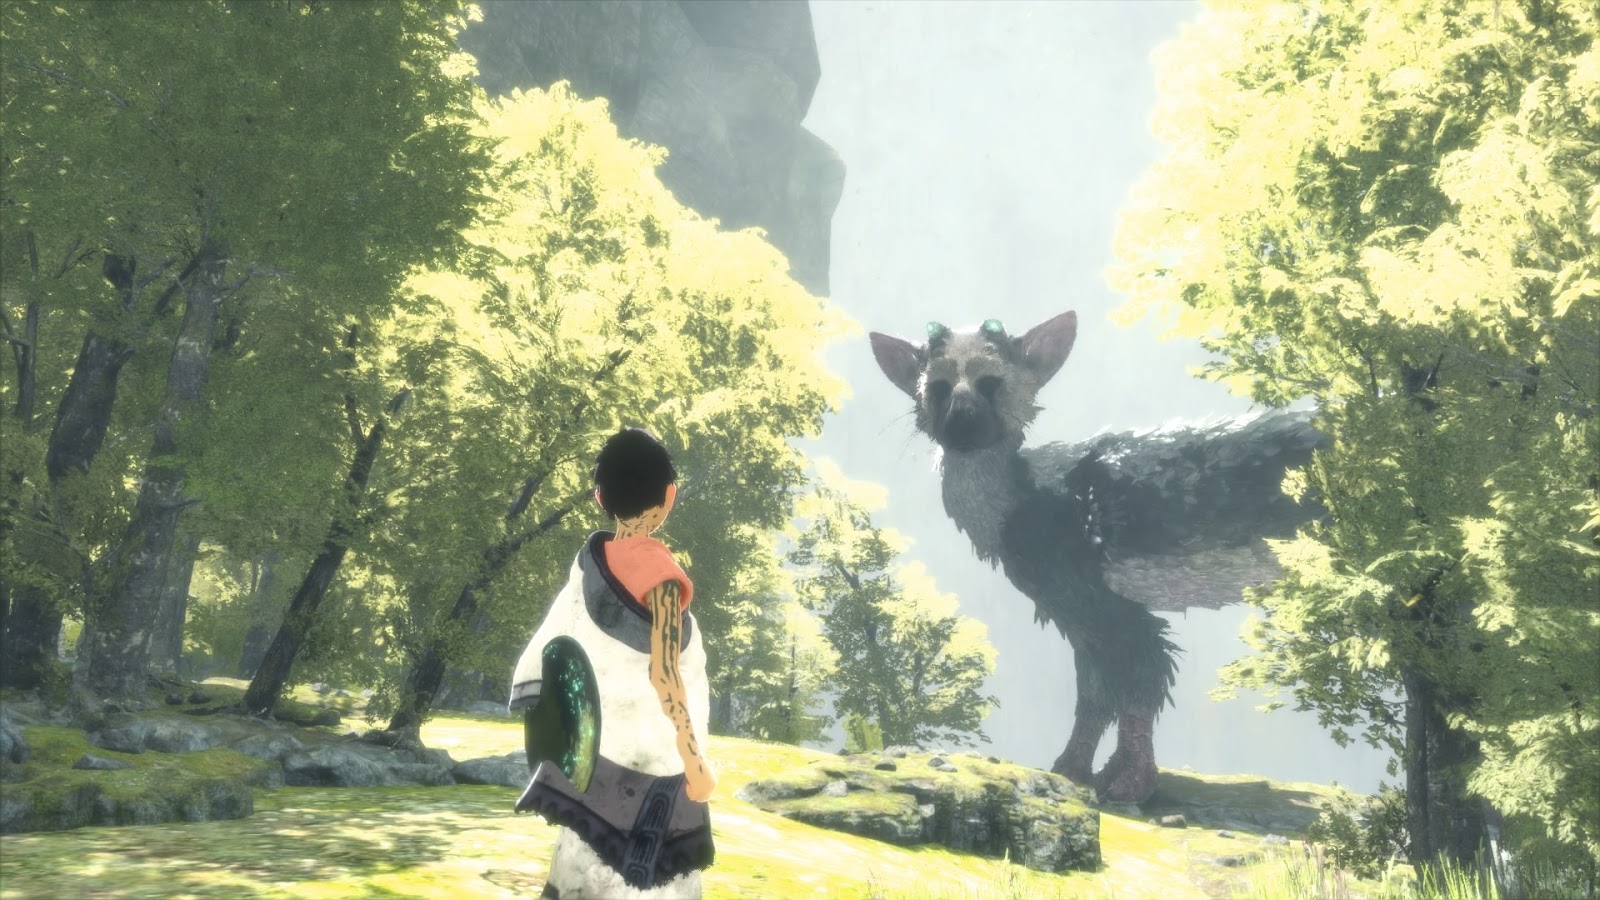 Game of the Year 2016 #7: The Last Guardian